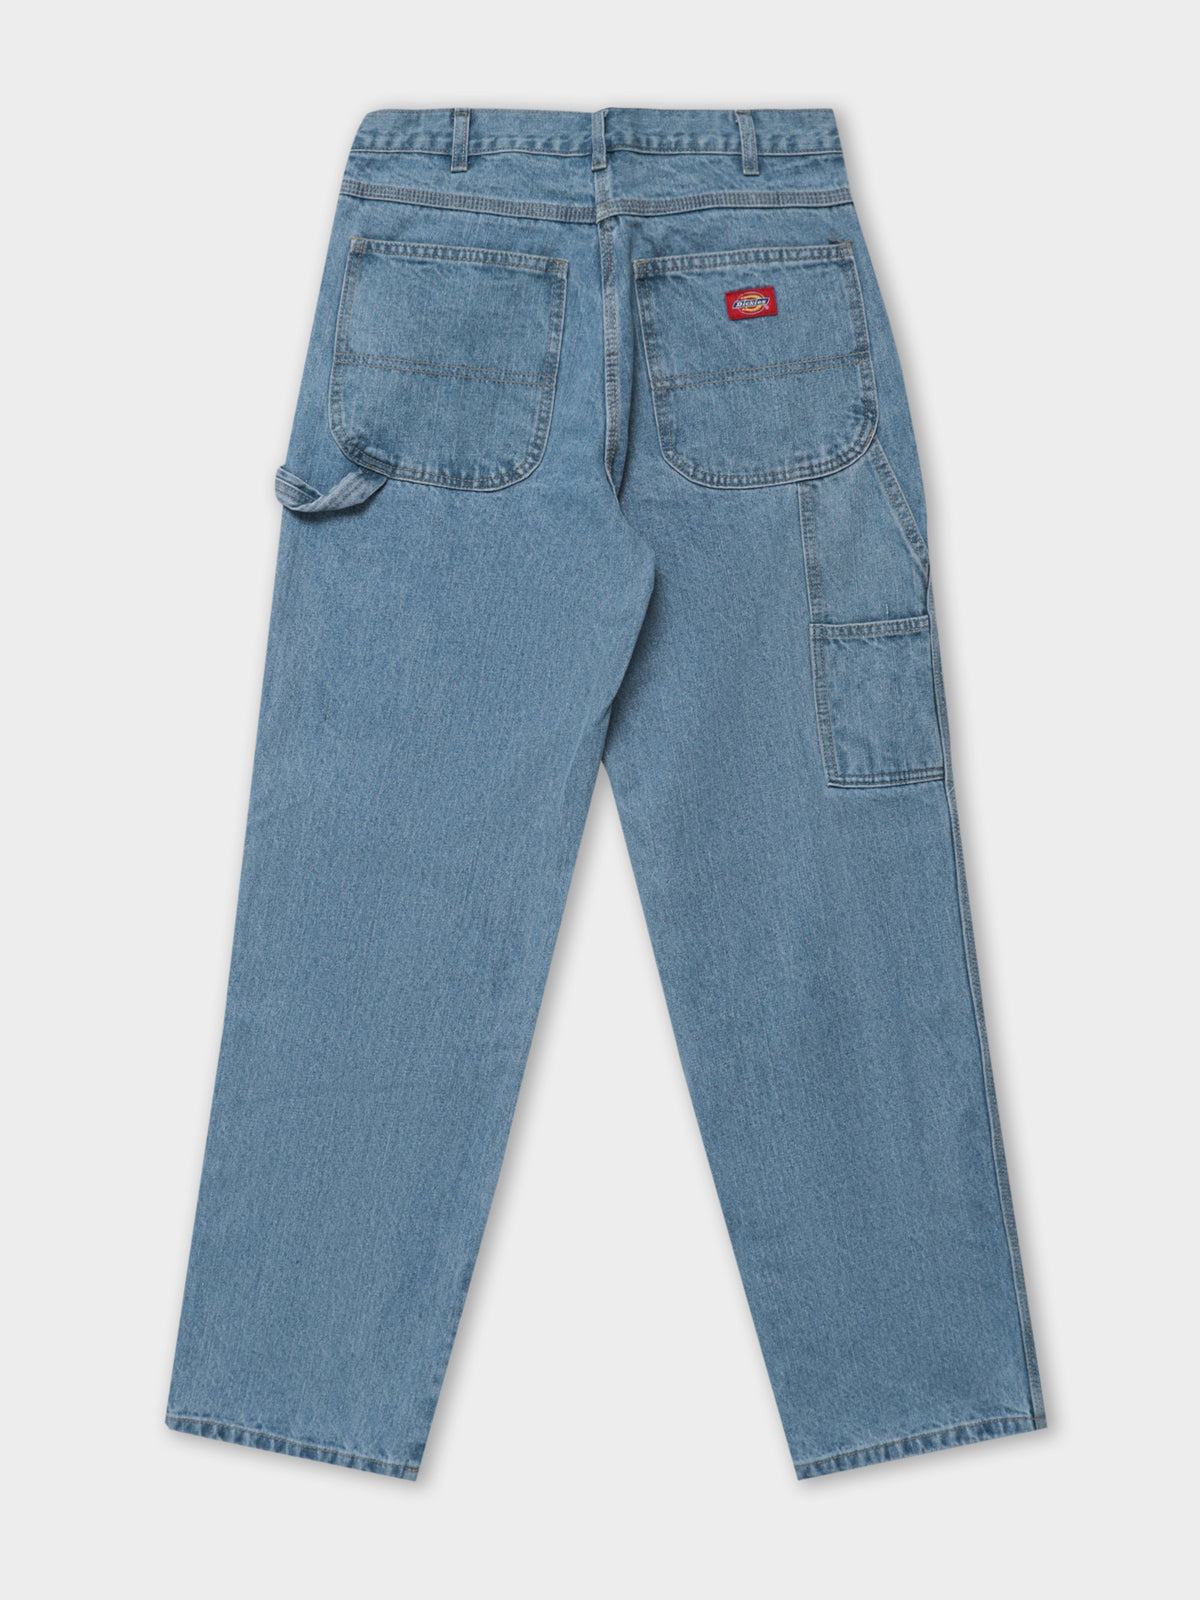 Relaxed Fit Carpenter Jeans in Indigo